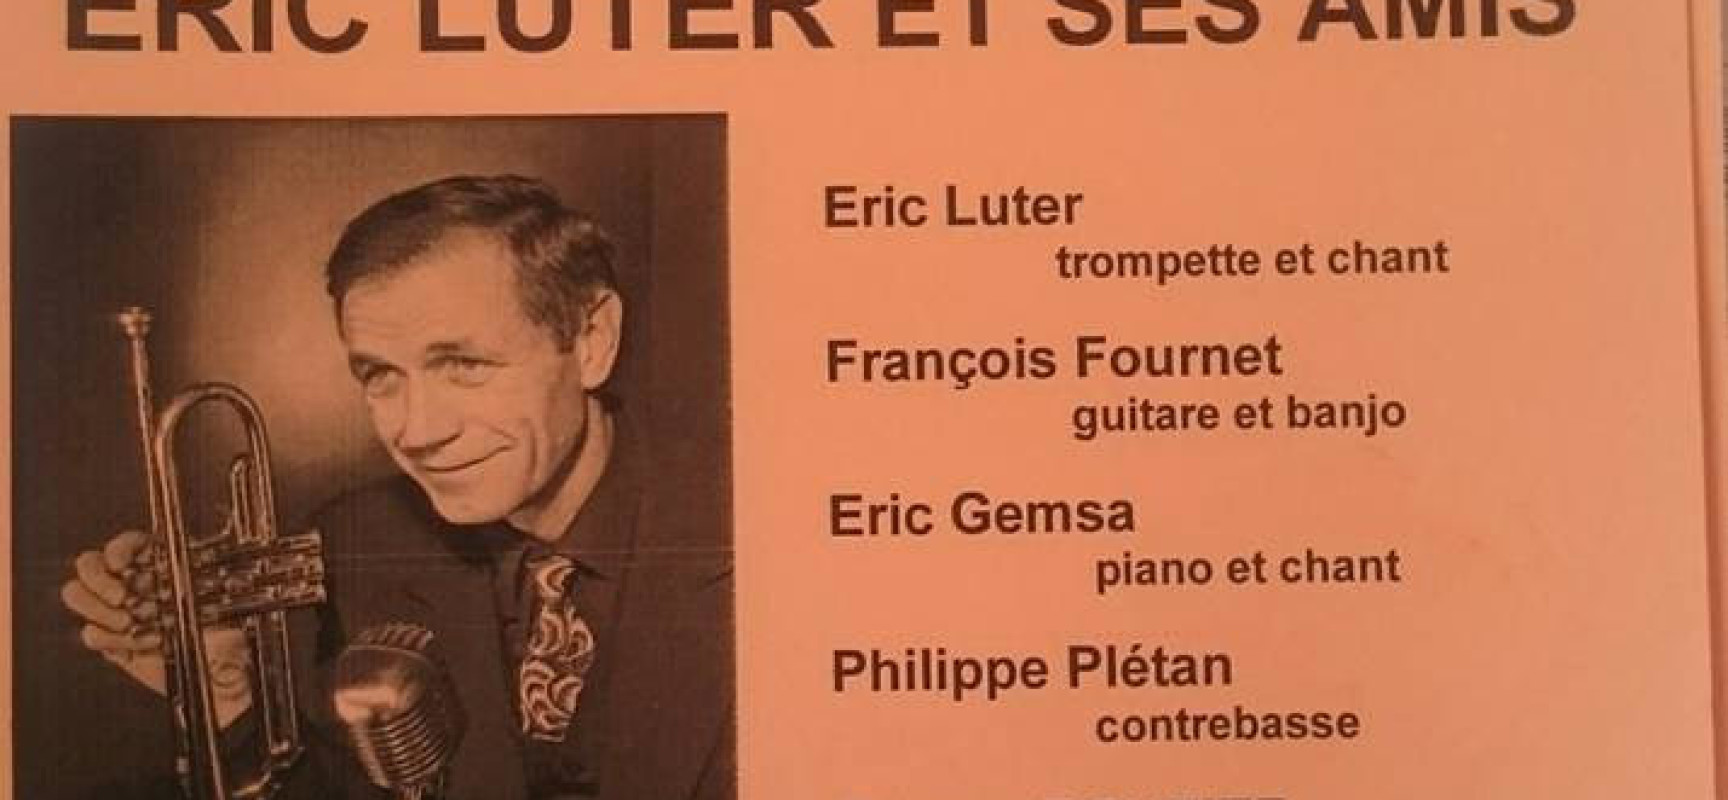 - JAZZ IN VALLIERE –  Eric Luter et ses amis